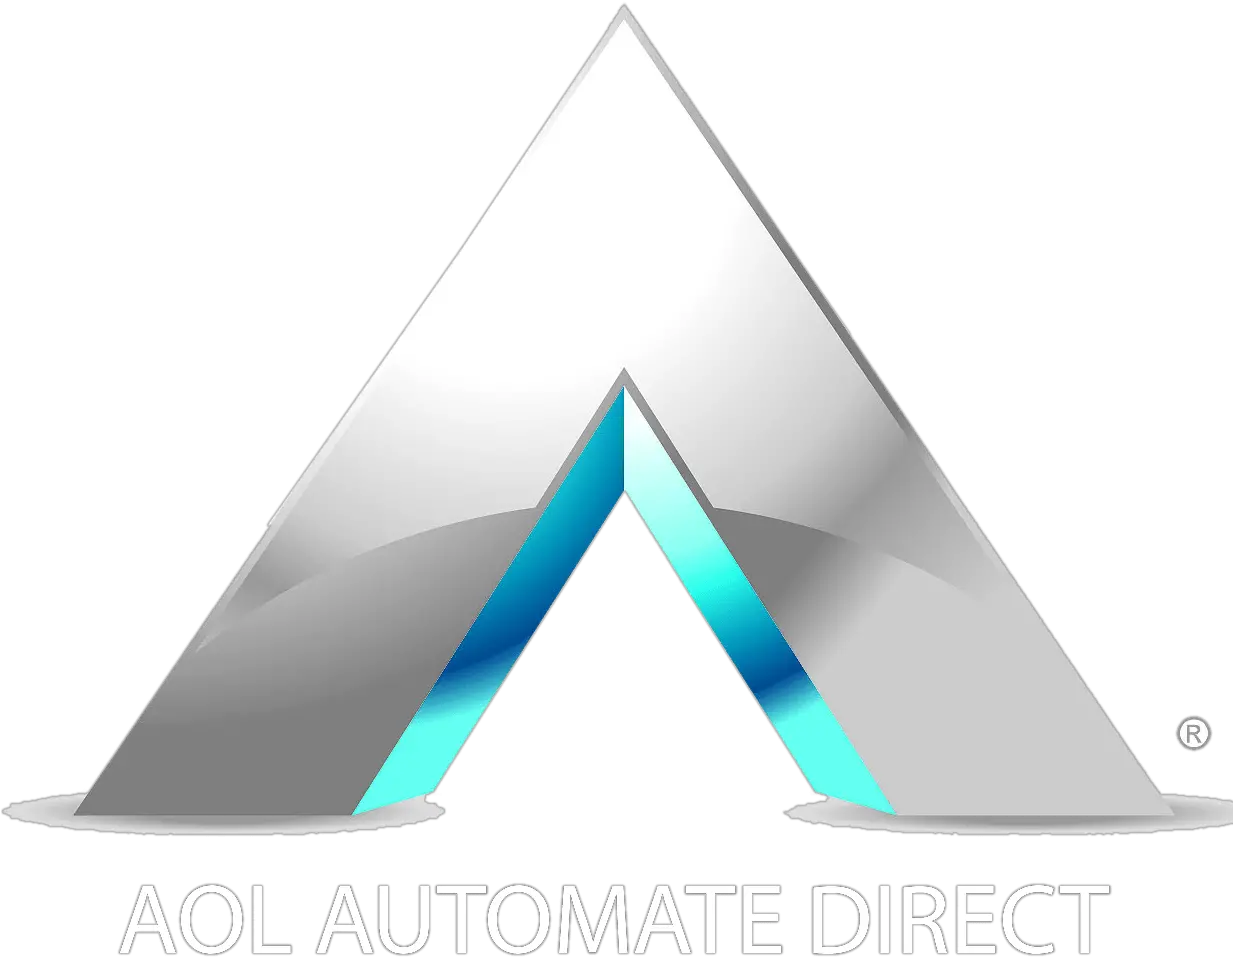 Aol Automate Leading Smart Home Automation Company In The Uk Vertical Png Aol Logo Png